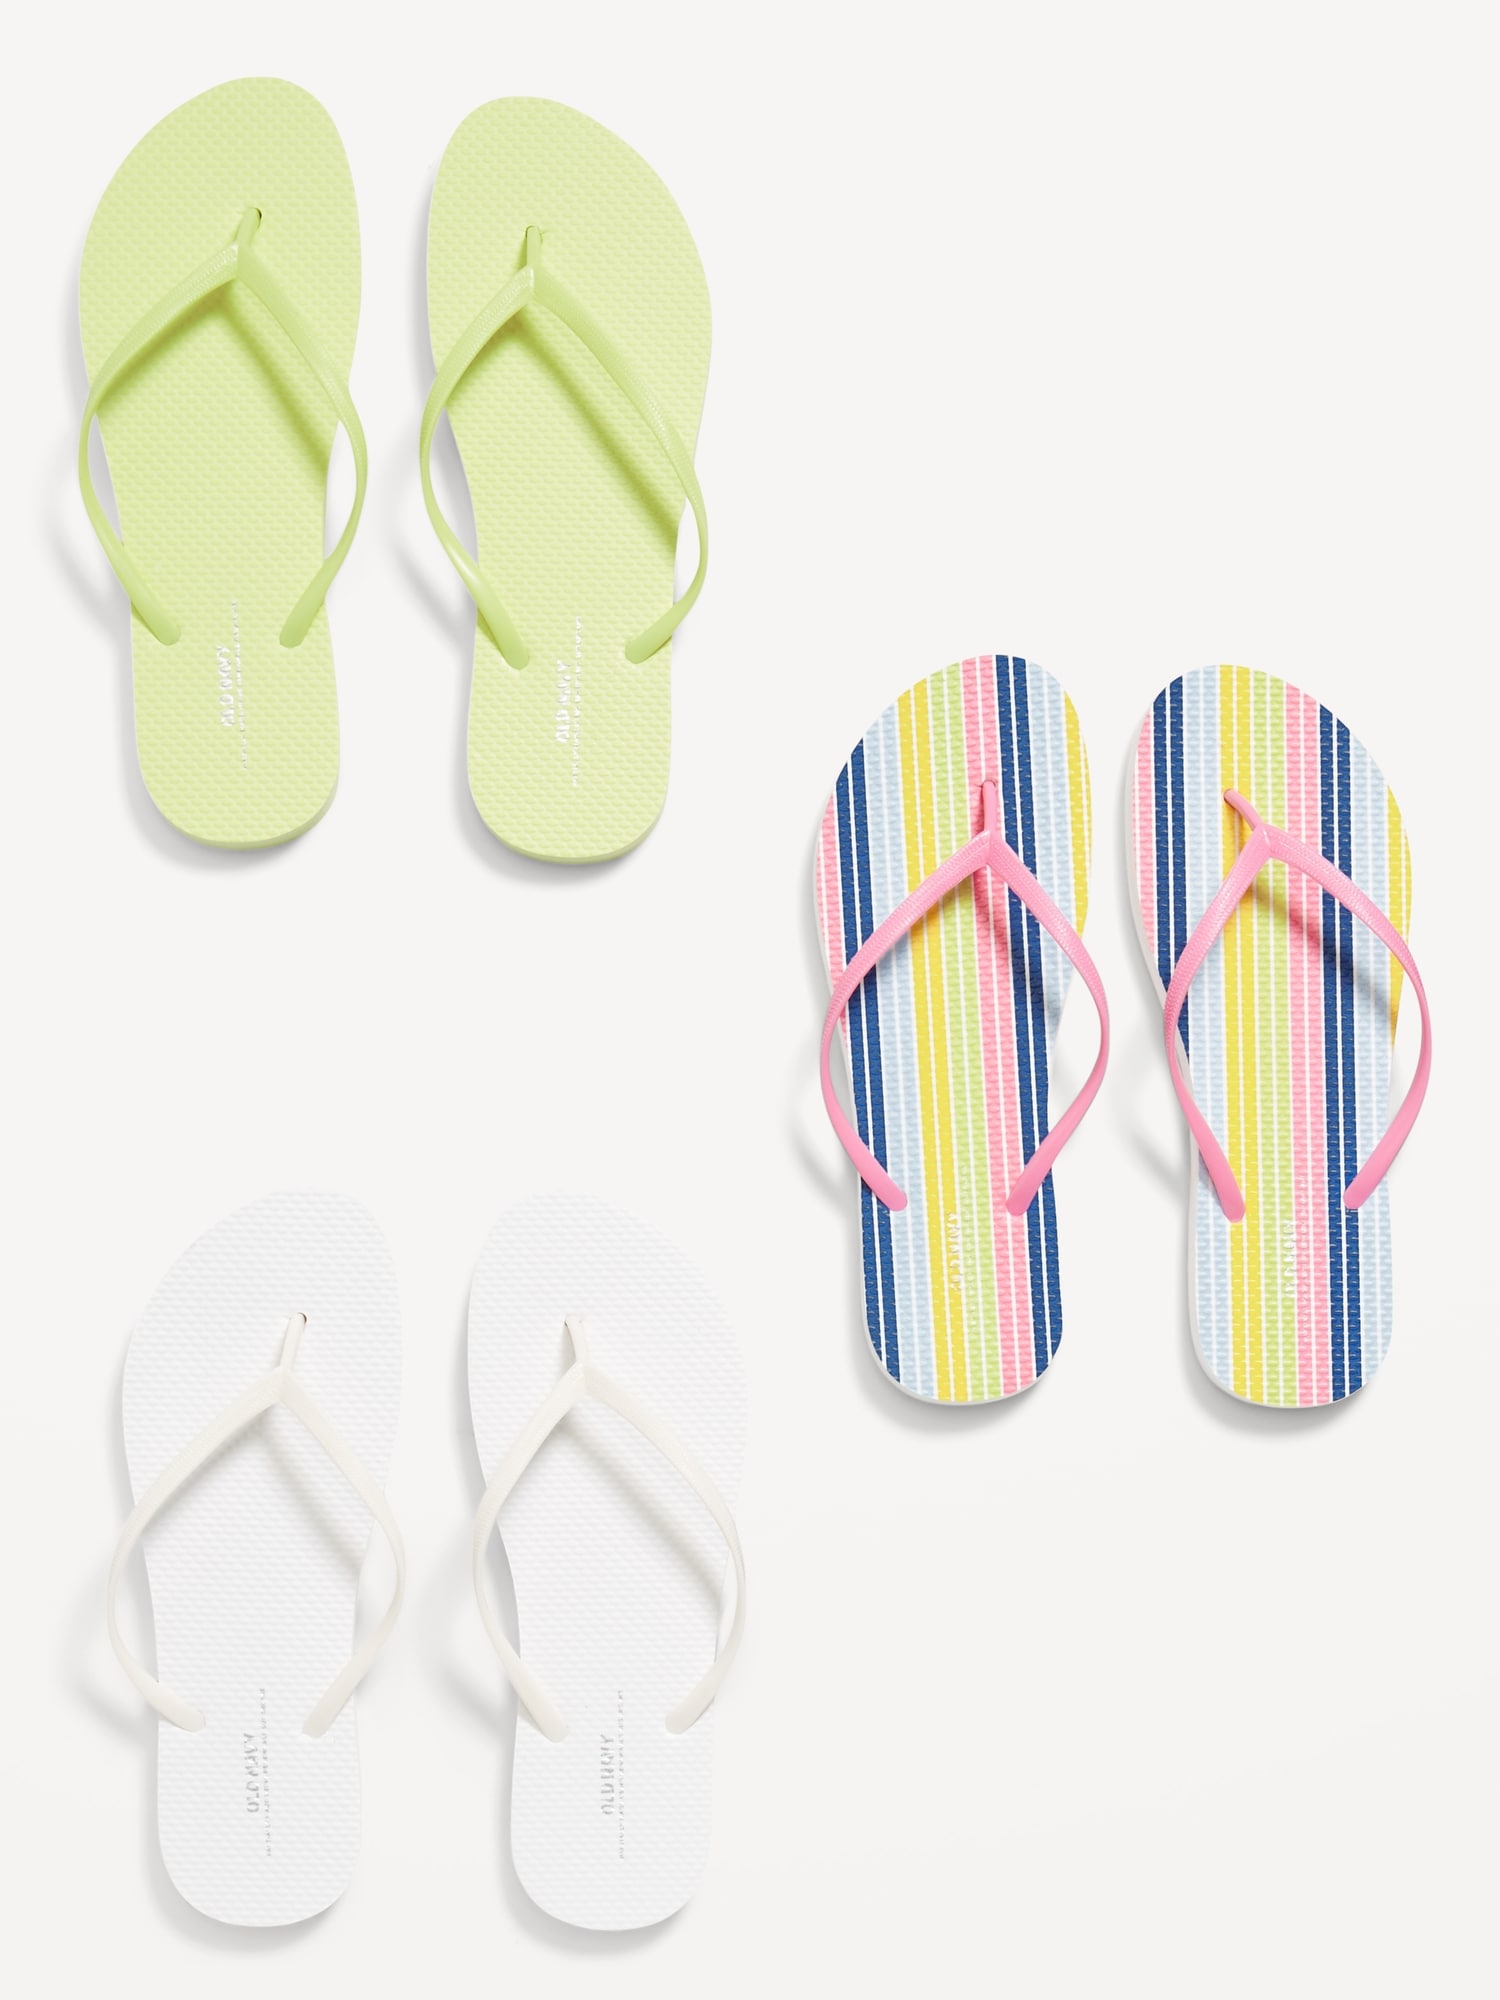 Old Navy Flip-Flop Sandals 3-Pack (Partially Plant-Based